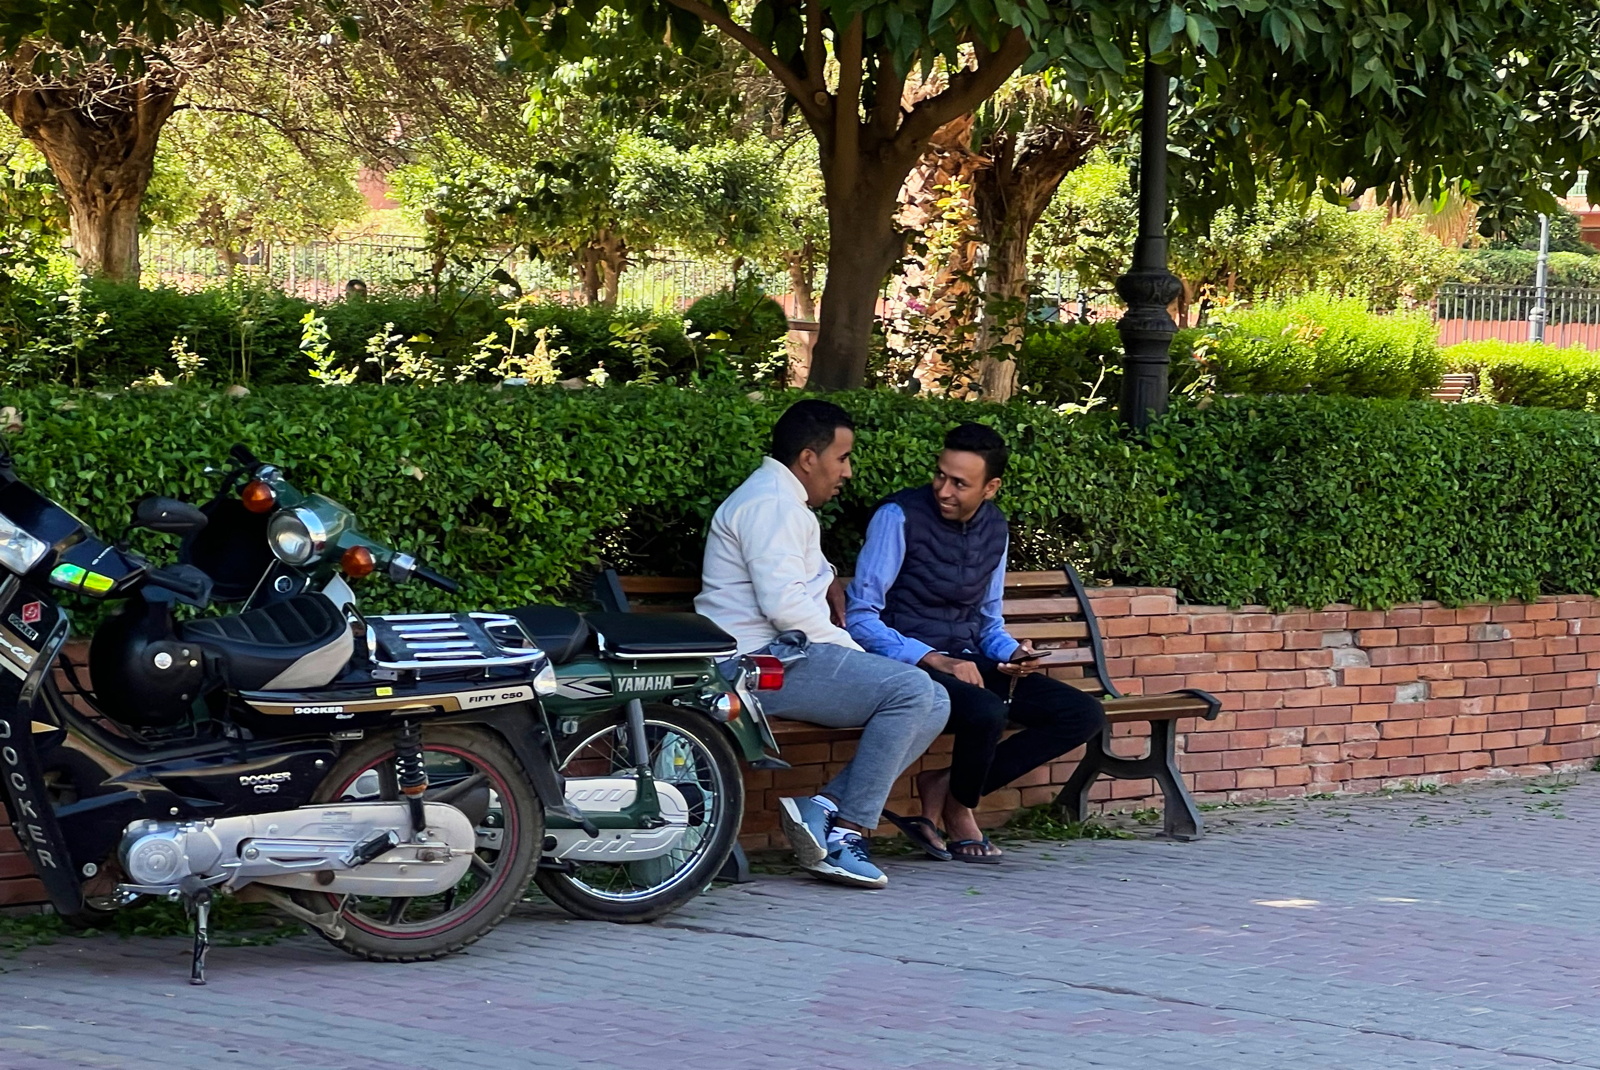 3 – Discussing motorbikes or... love? Morocco